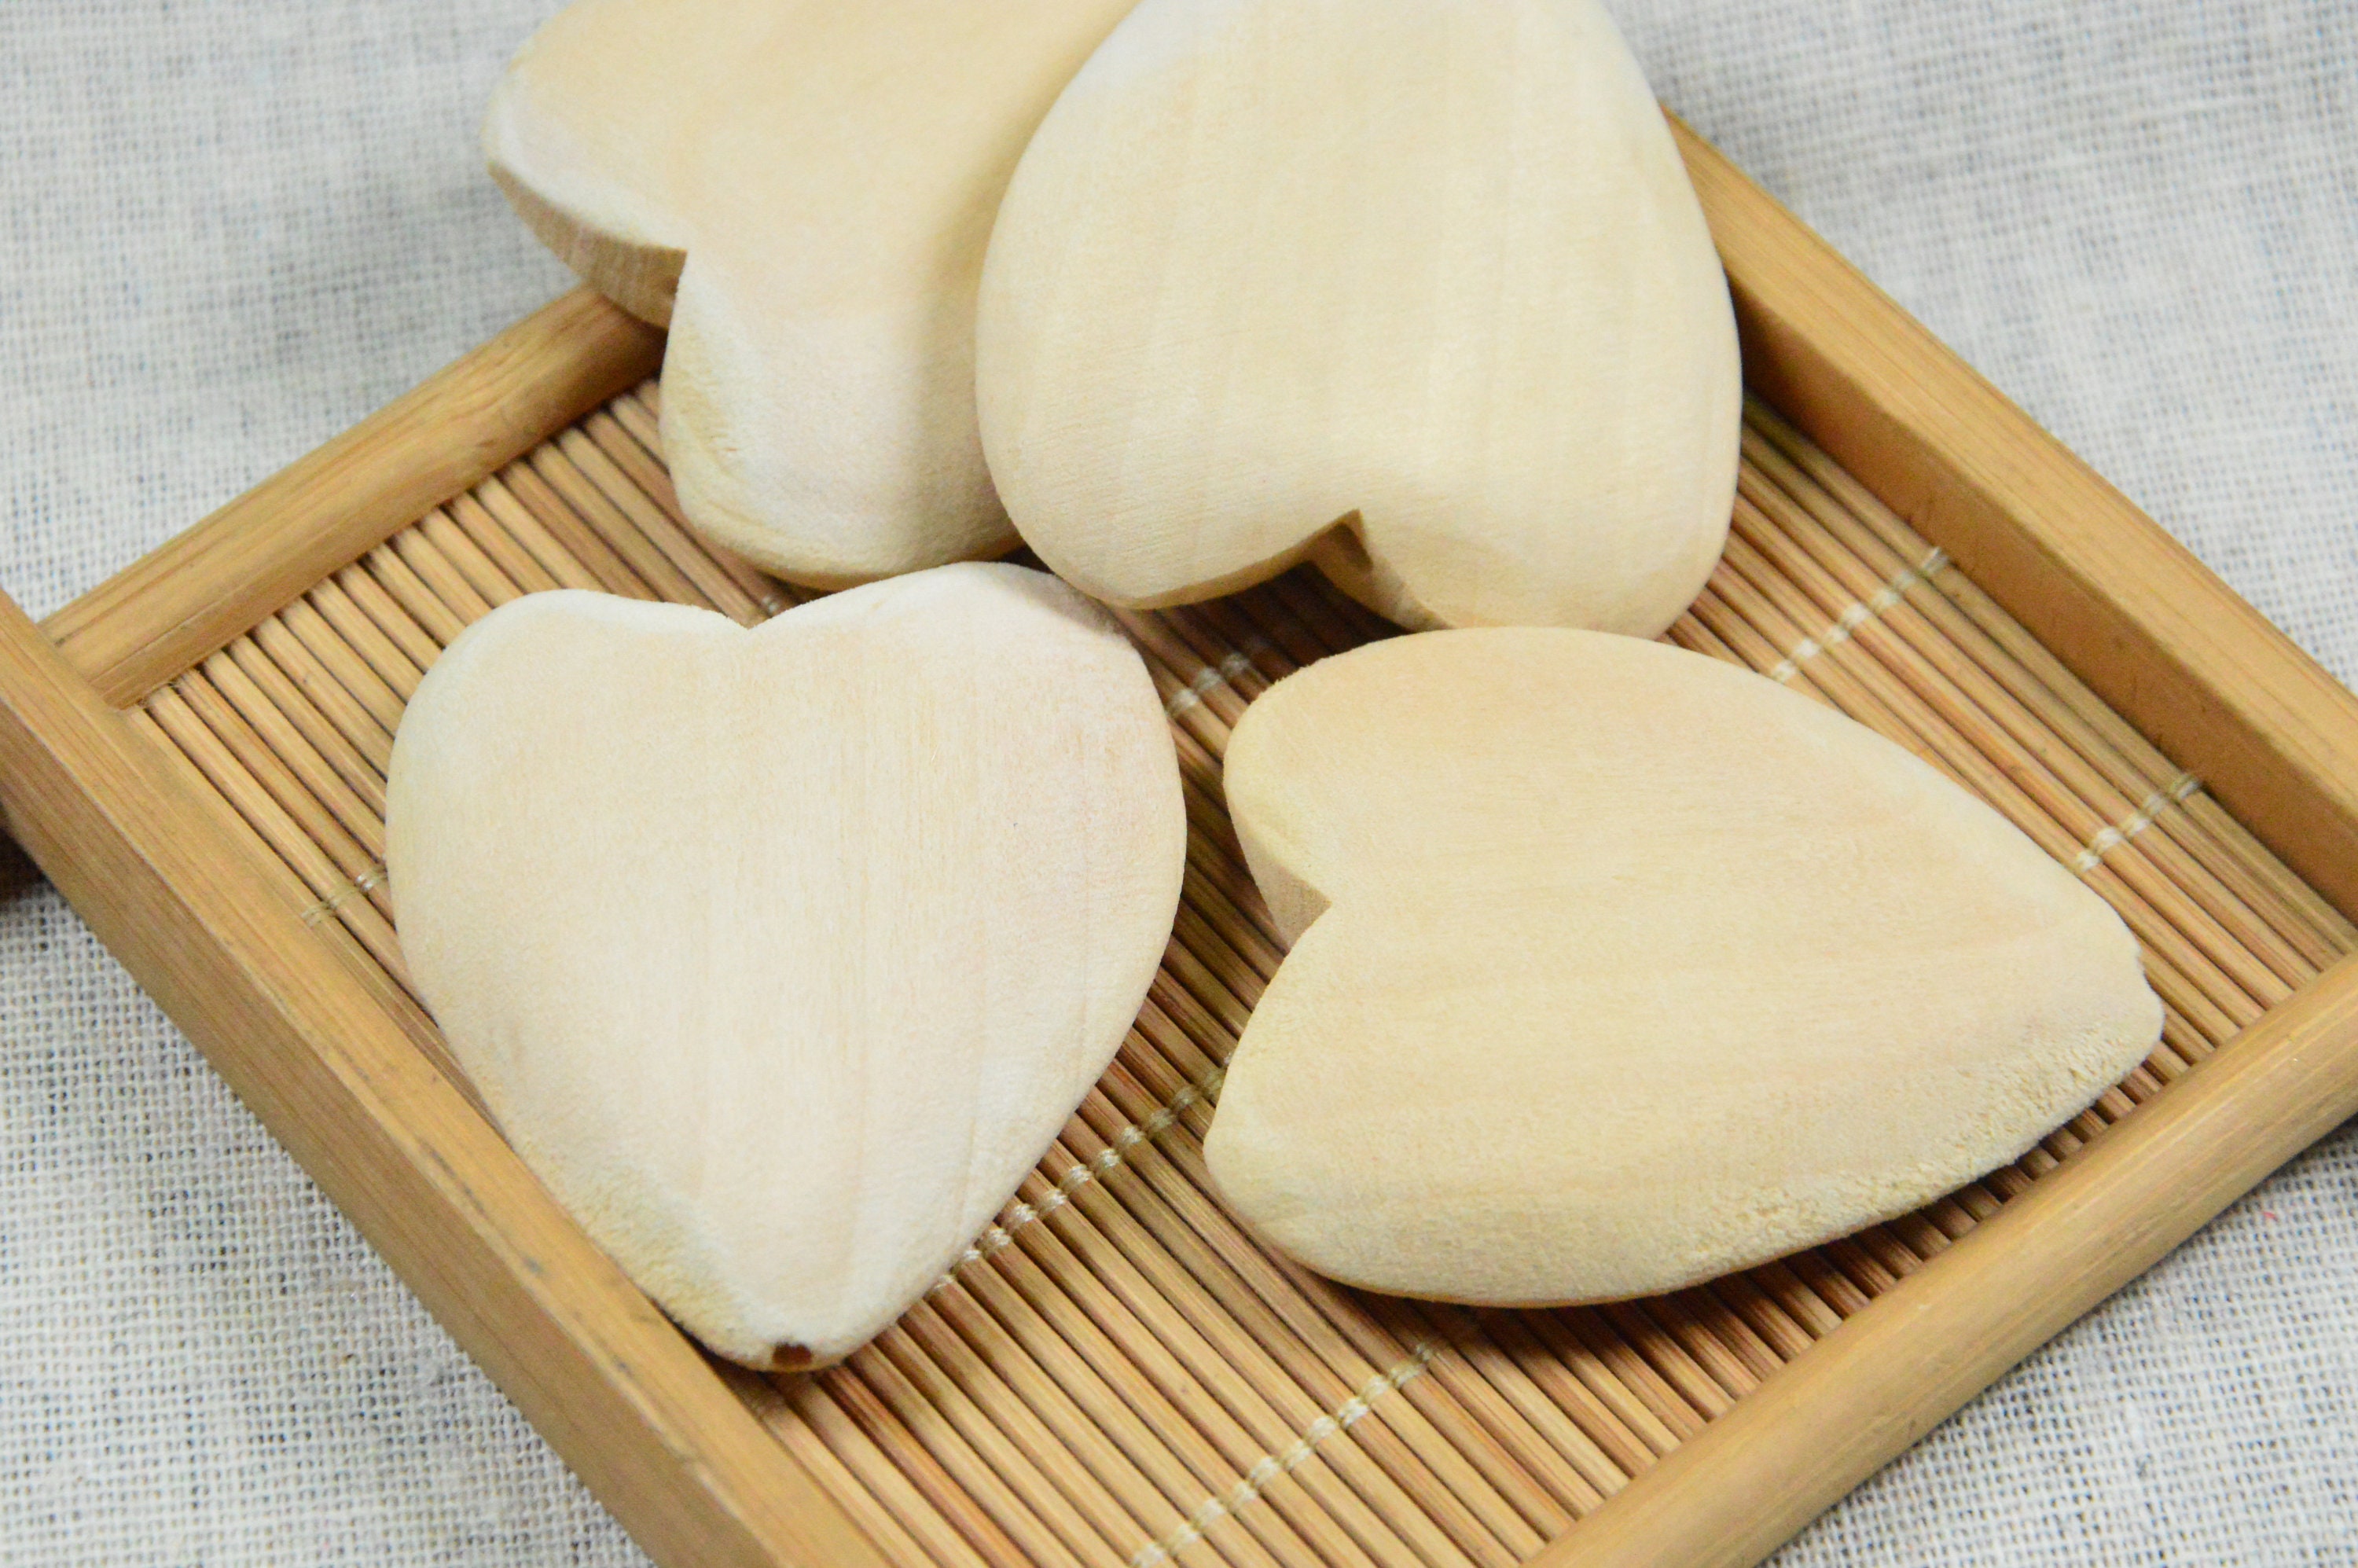 Welliestr 100Pack, 80mm/3inch Wooden Heart, Natural Unfinished Wood Heart Cutout Shape, Wood Hearts Birthday Party Supplies